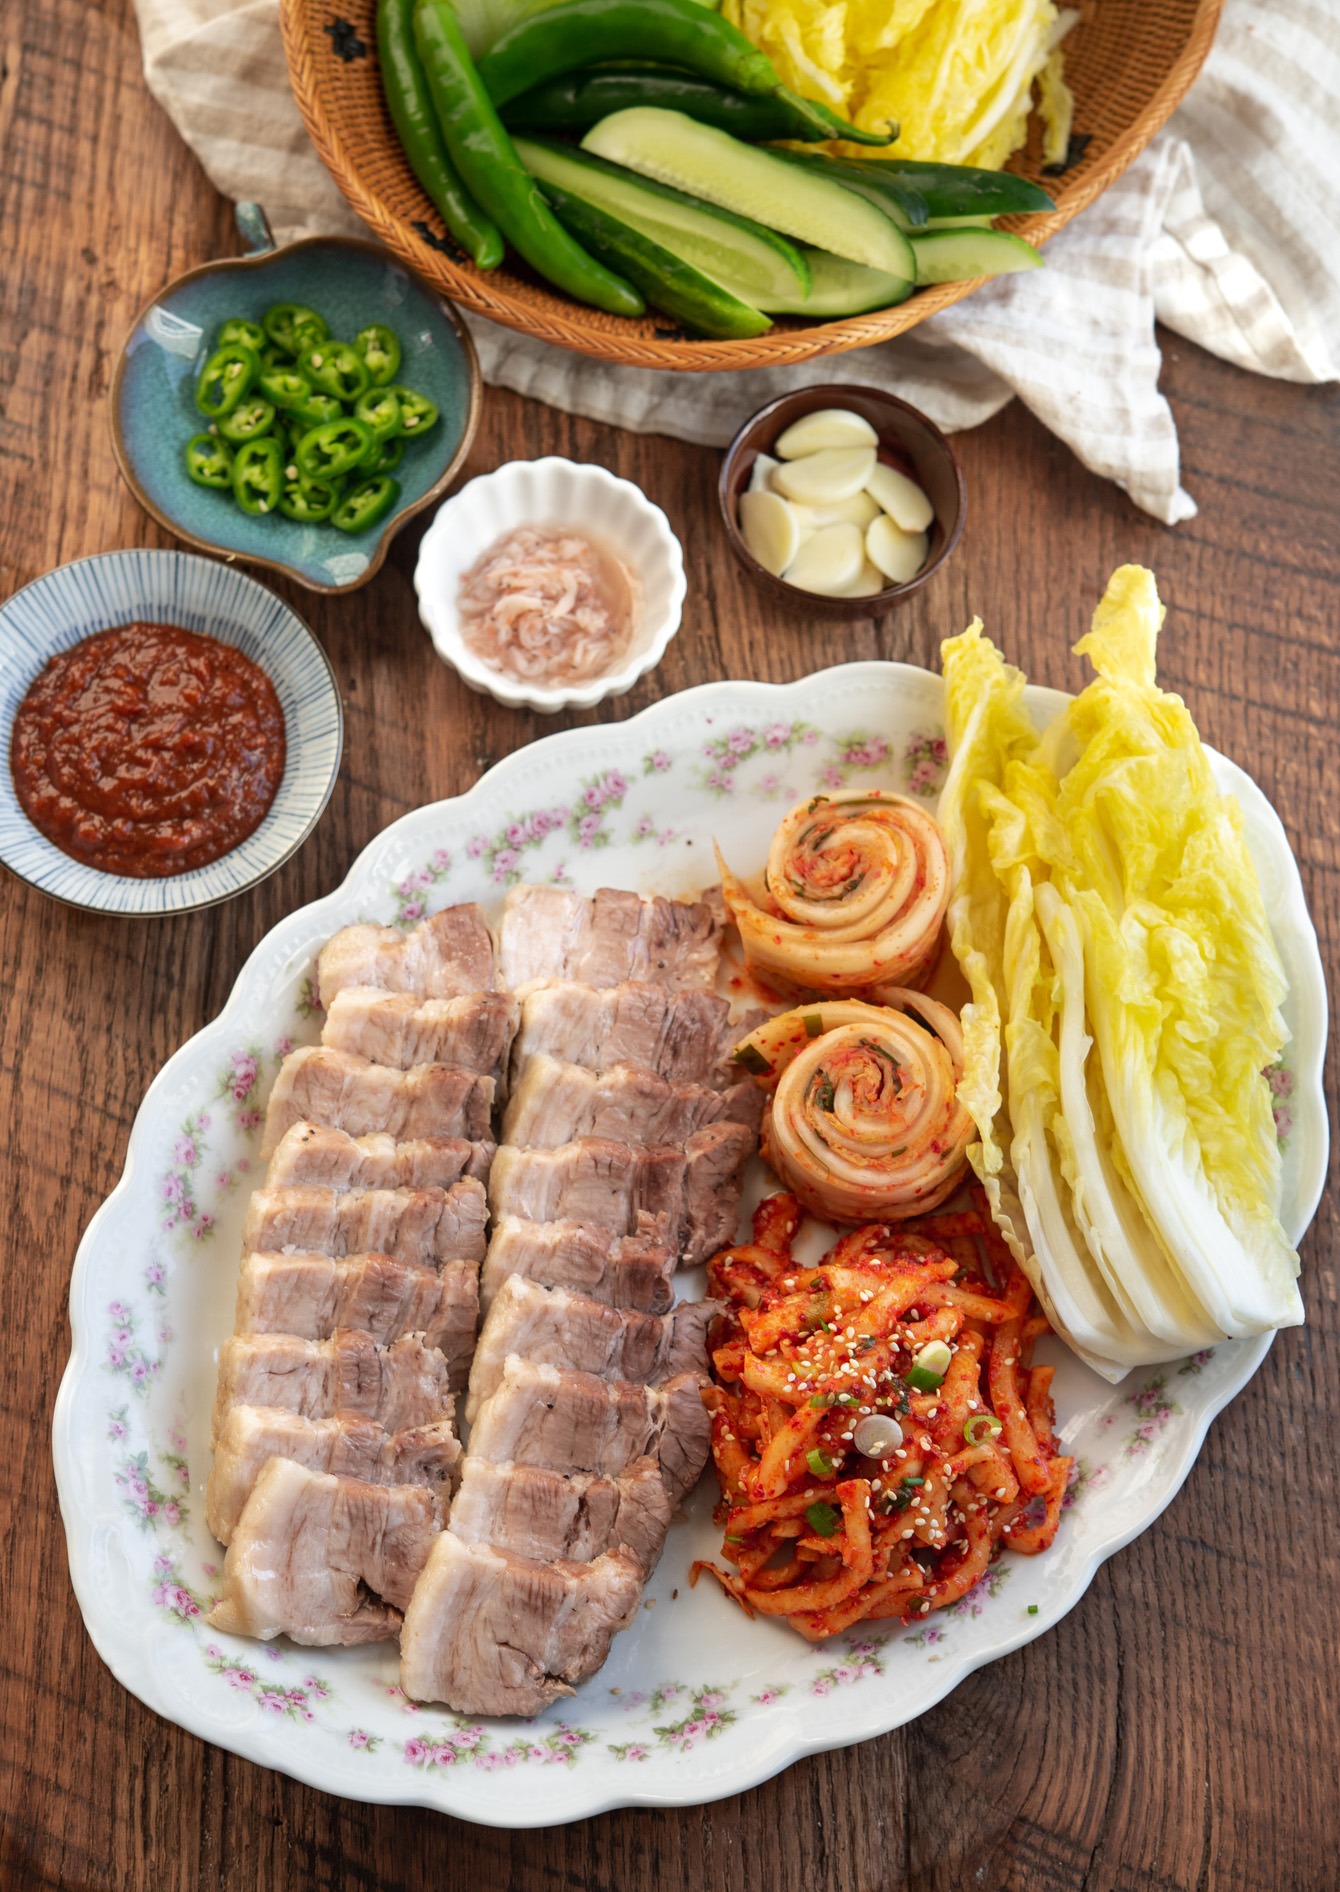 Korean bossam arranged in a platter with cabbage leaves, and radish salad.